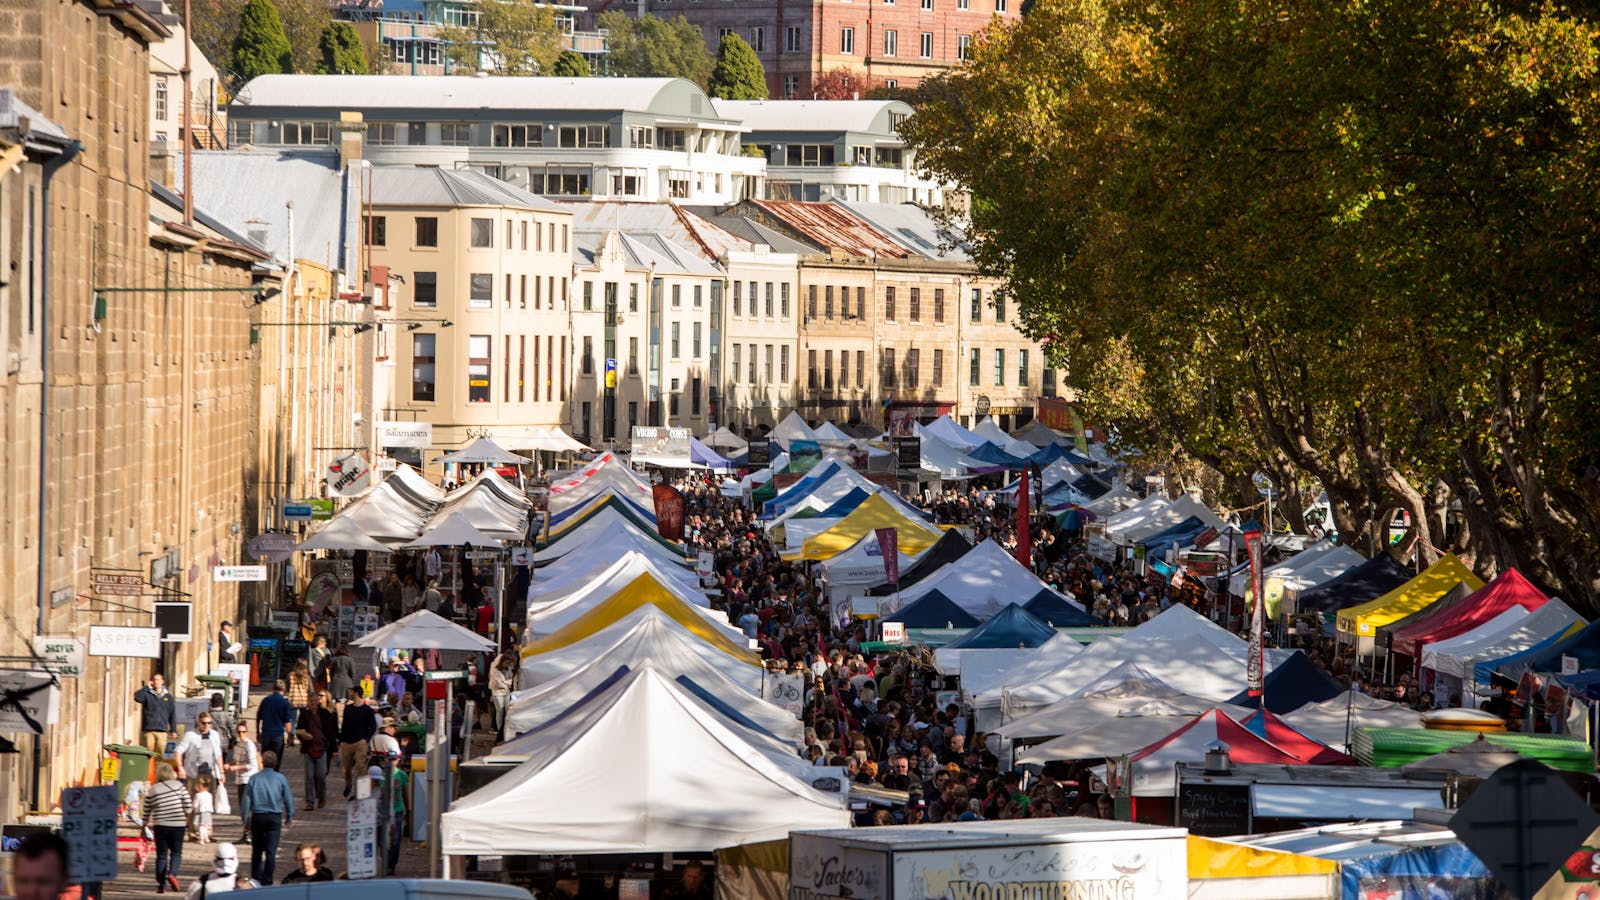 Over 300 stalls to browse every Saturday